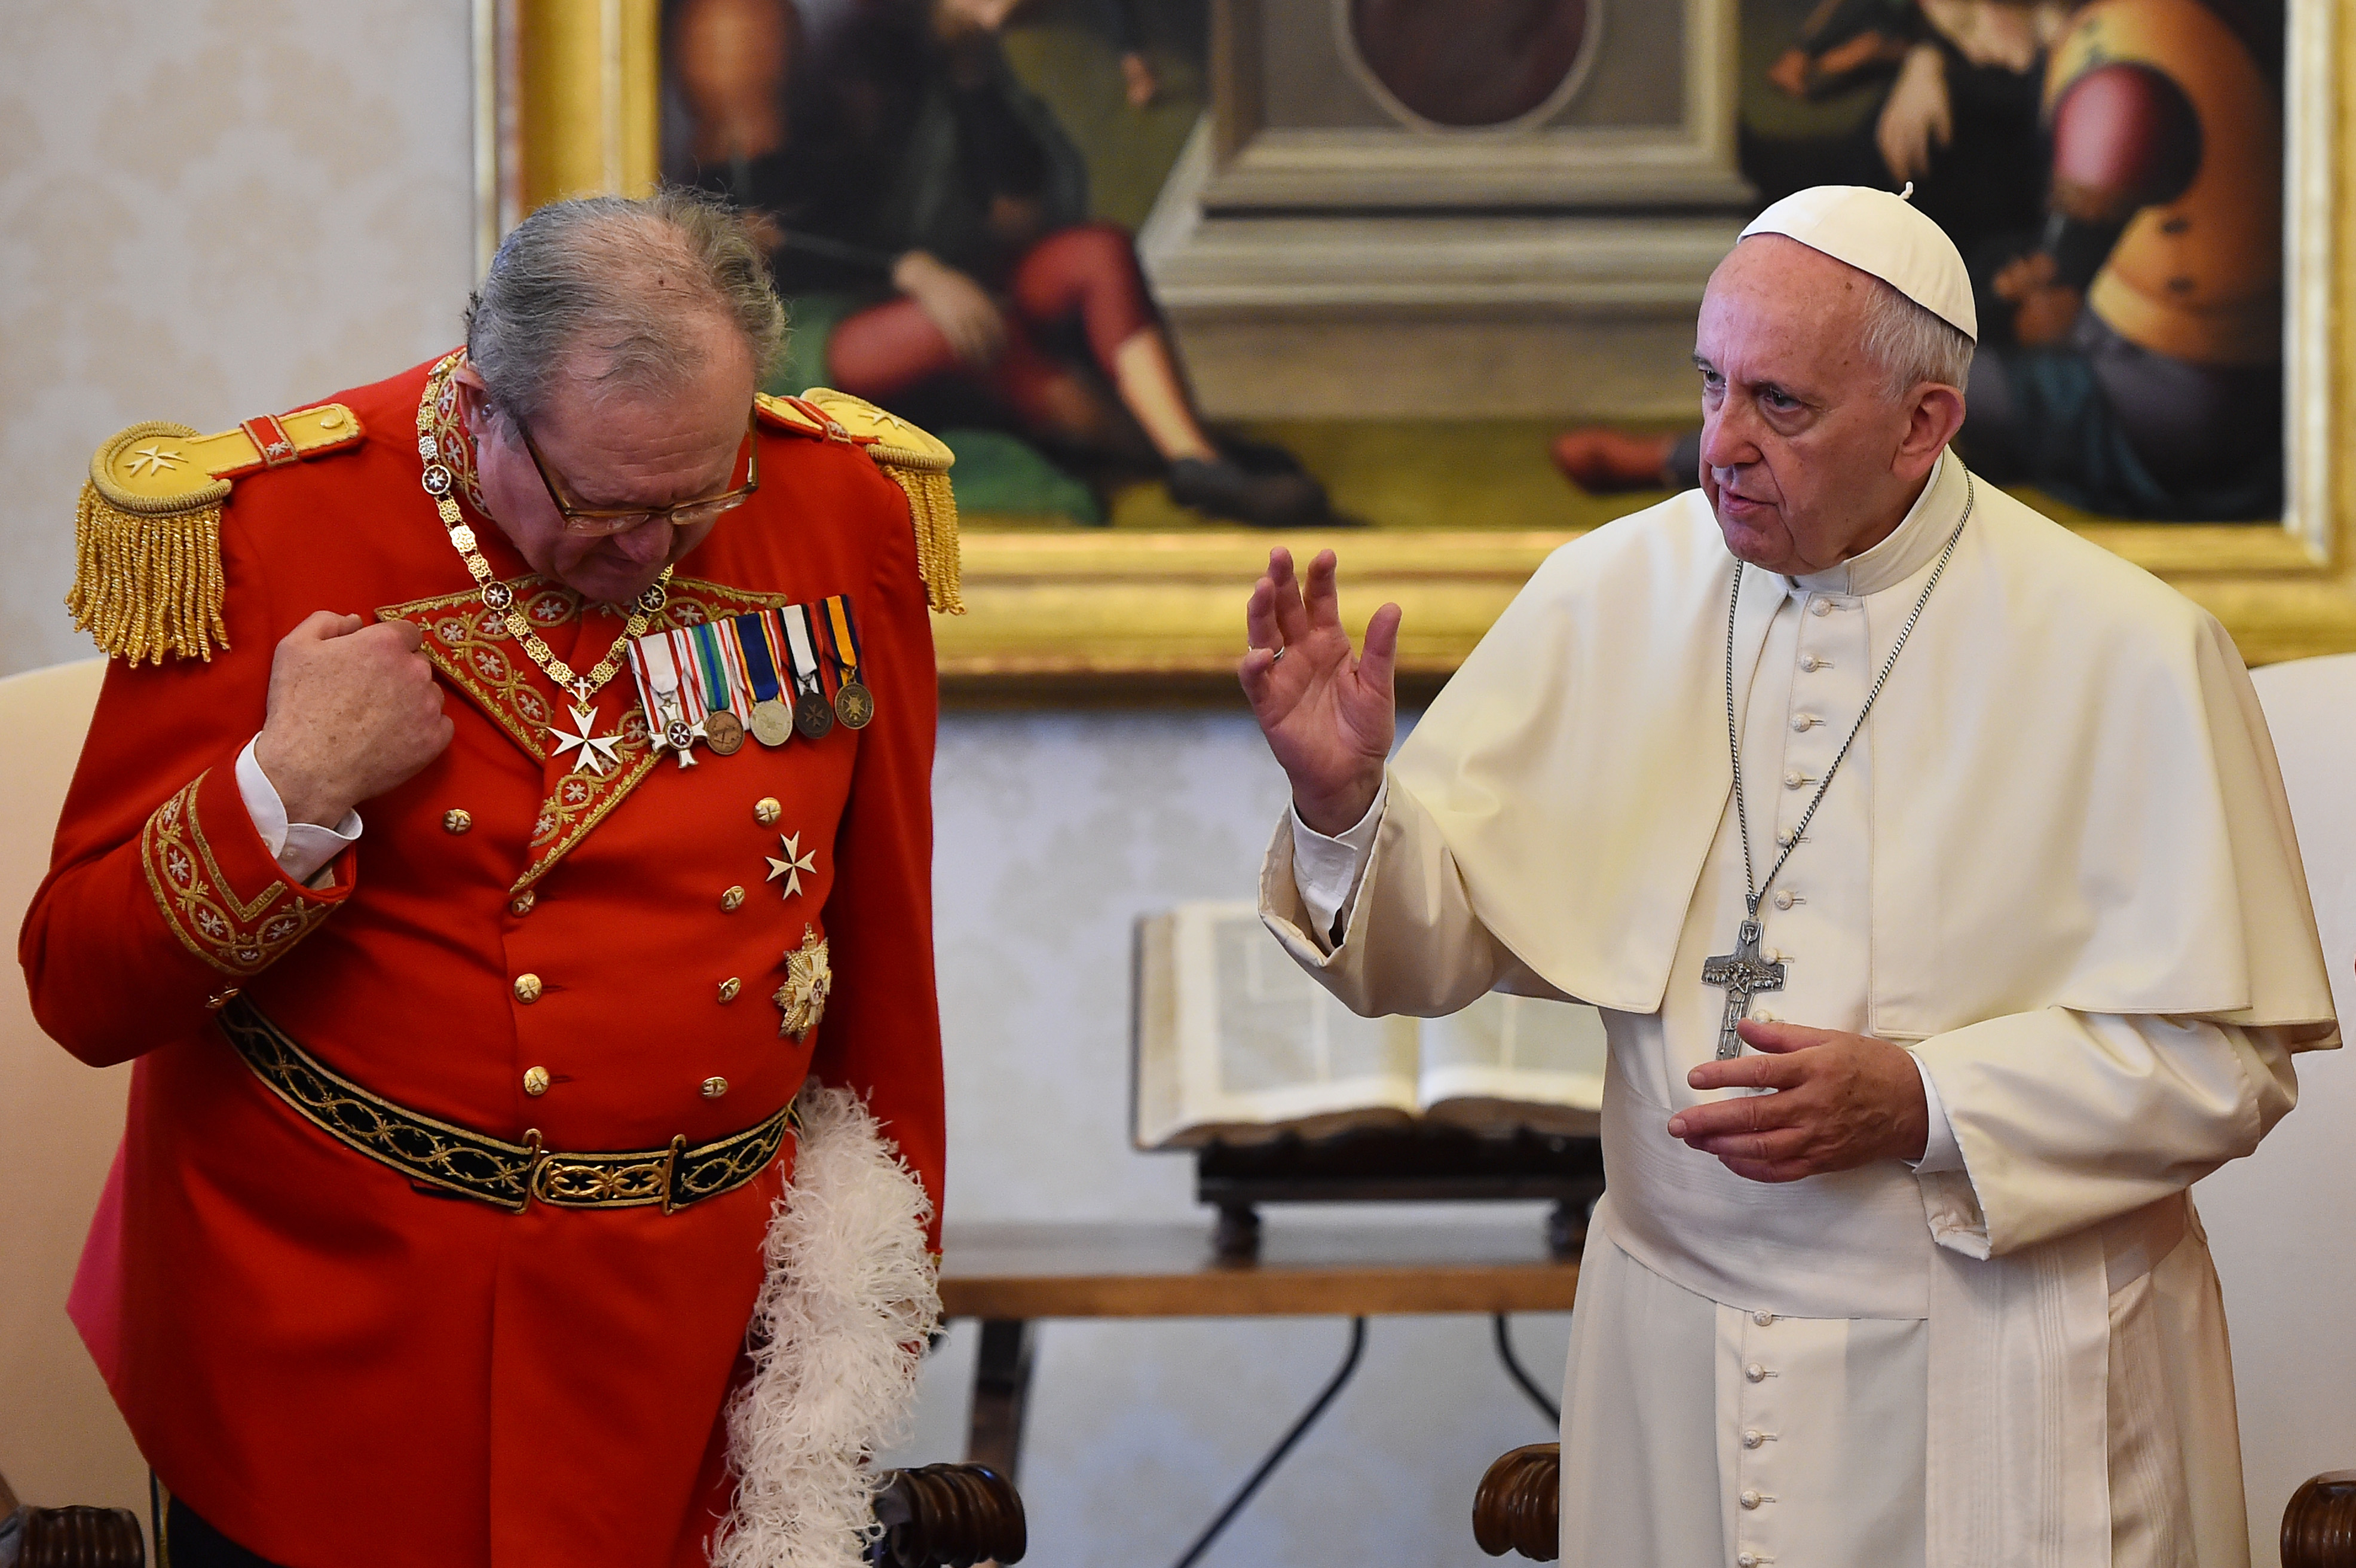 Pope Francis makes the sign of the cross next to Robert Matthew Festing, Prince and Grand Master of the Sovereign Order of Malta during a private audience on June 23, 2016 at the Vatican. / AFP PHOTO / POOL / GABRIEL BOUYS